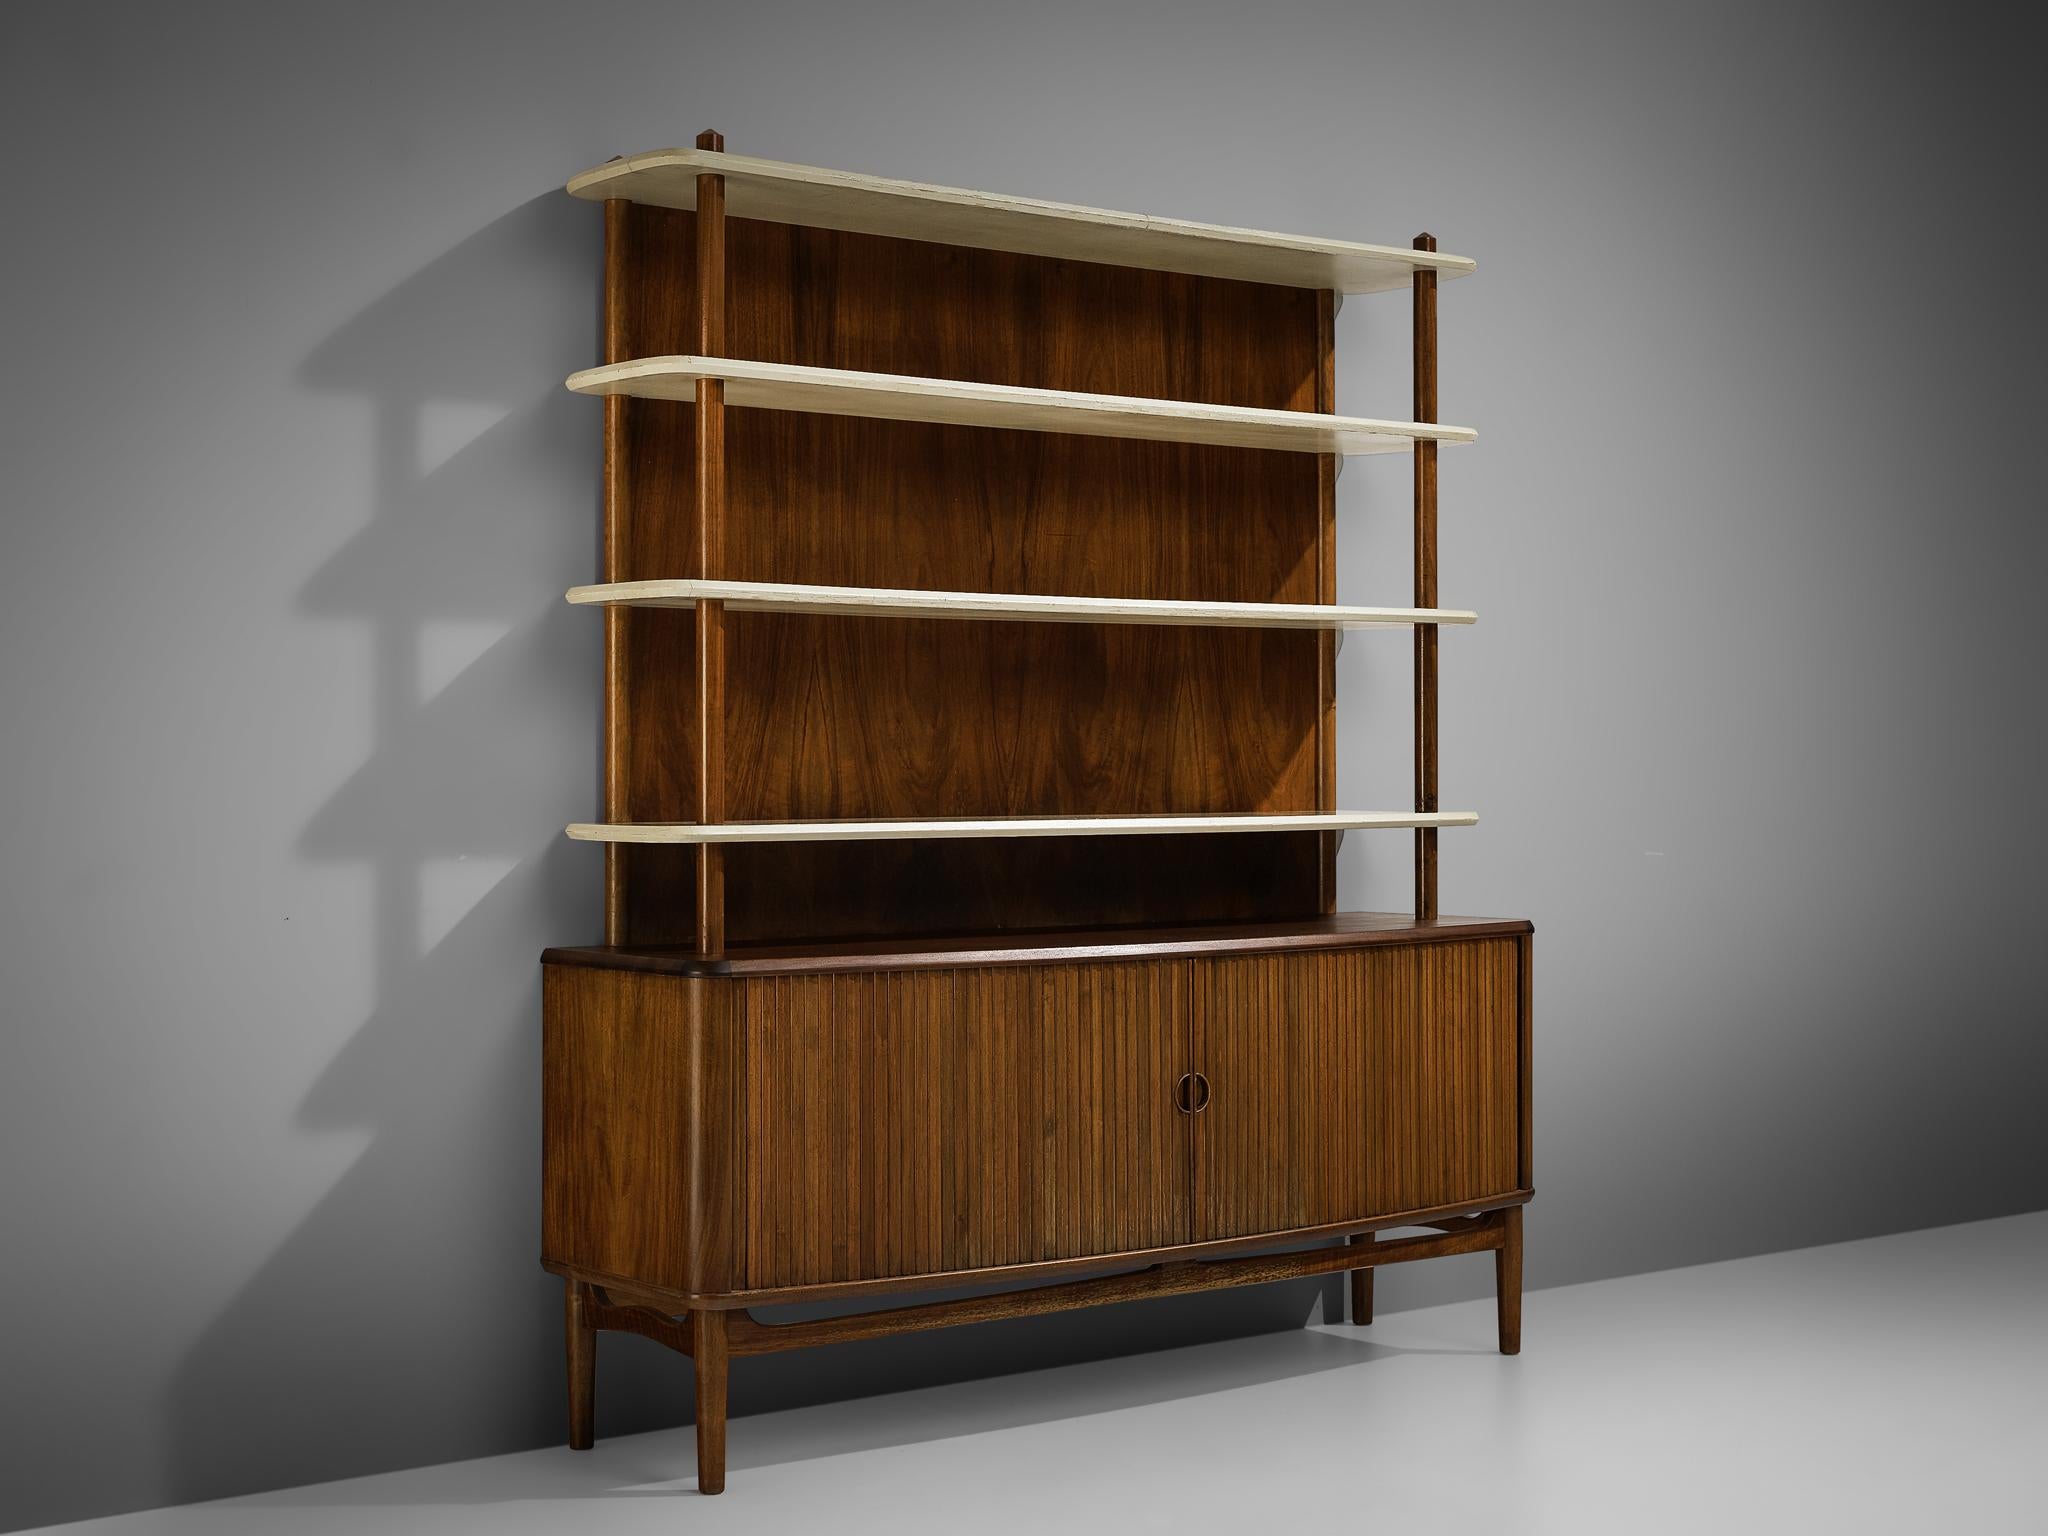 Kurt Olsen for A. Andersen & Bohm, bookcase, walnut, wood, Denmark, 1950

Kurt Olsen made this combination of a cabinet and open shelf in 1950 for A. Andersen & Bohm. Two tambour doors access the cabinet at the bottom which is equipped with shelves